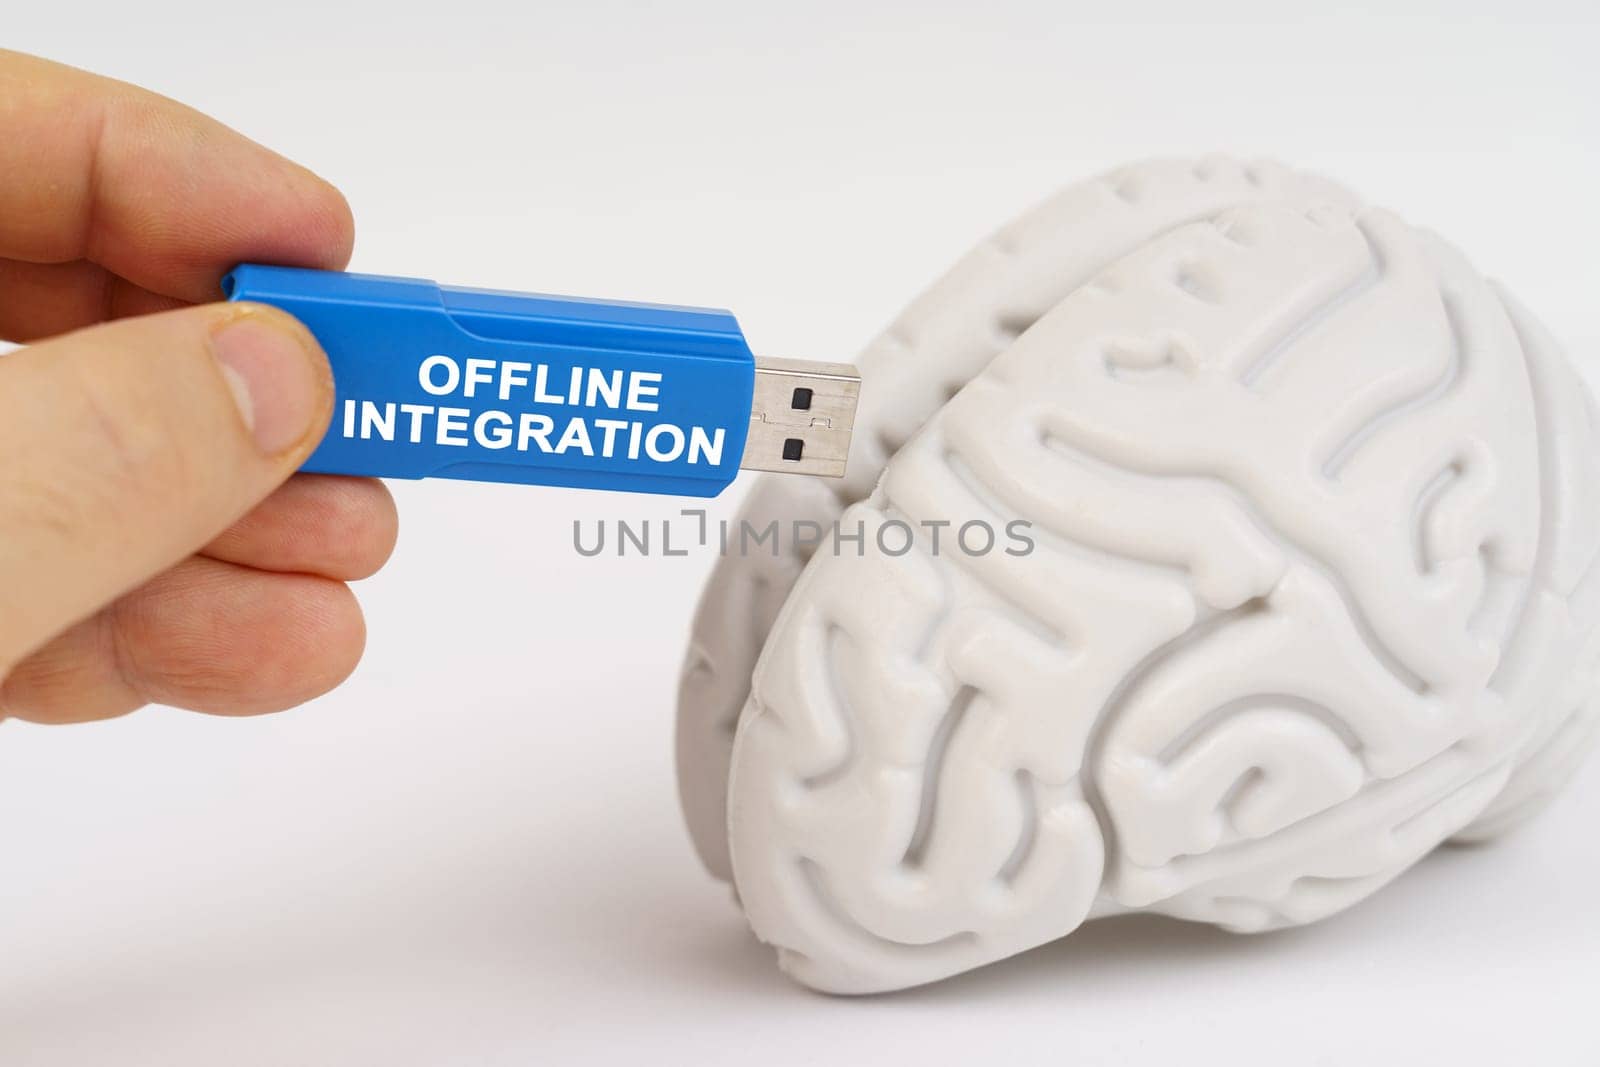 A man inserts a flash drive into his brain with the inscription - Offline Integration. Business and technology concept.